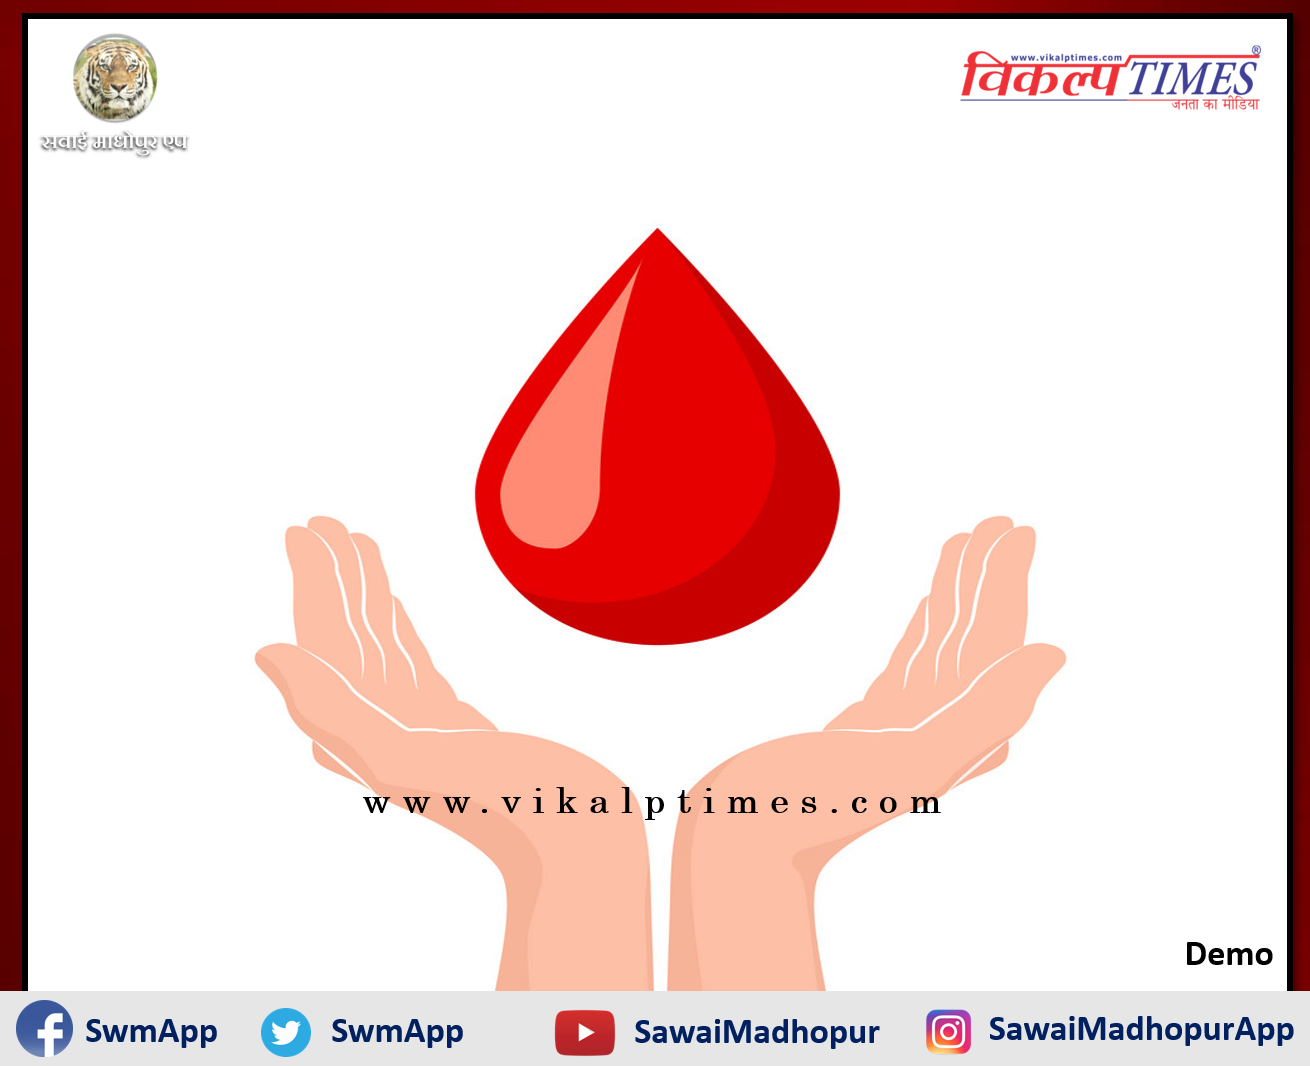 Voluntary blood donation camp will be organized on Friday in Sawai Madhopur